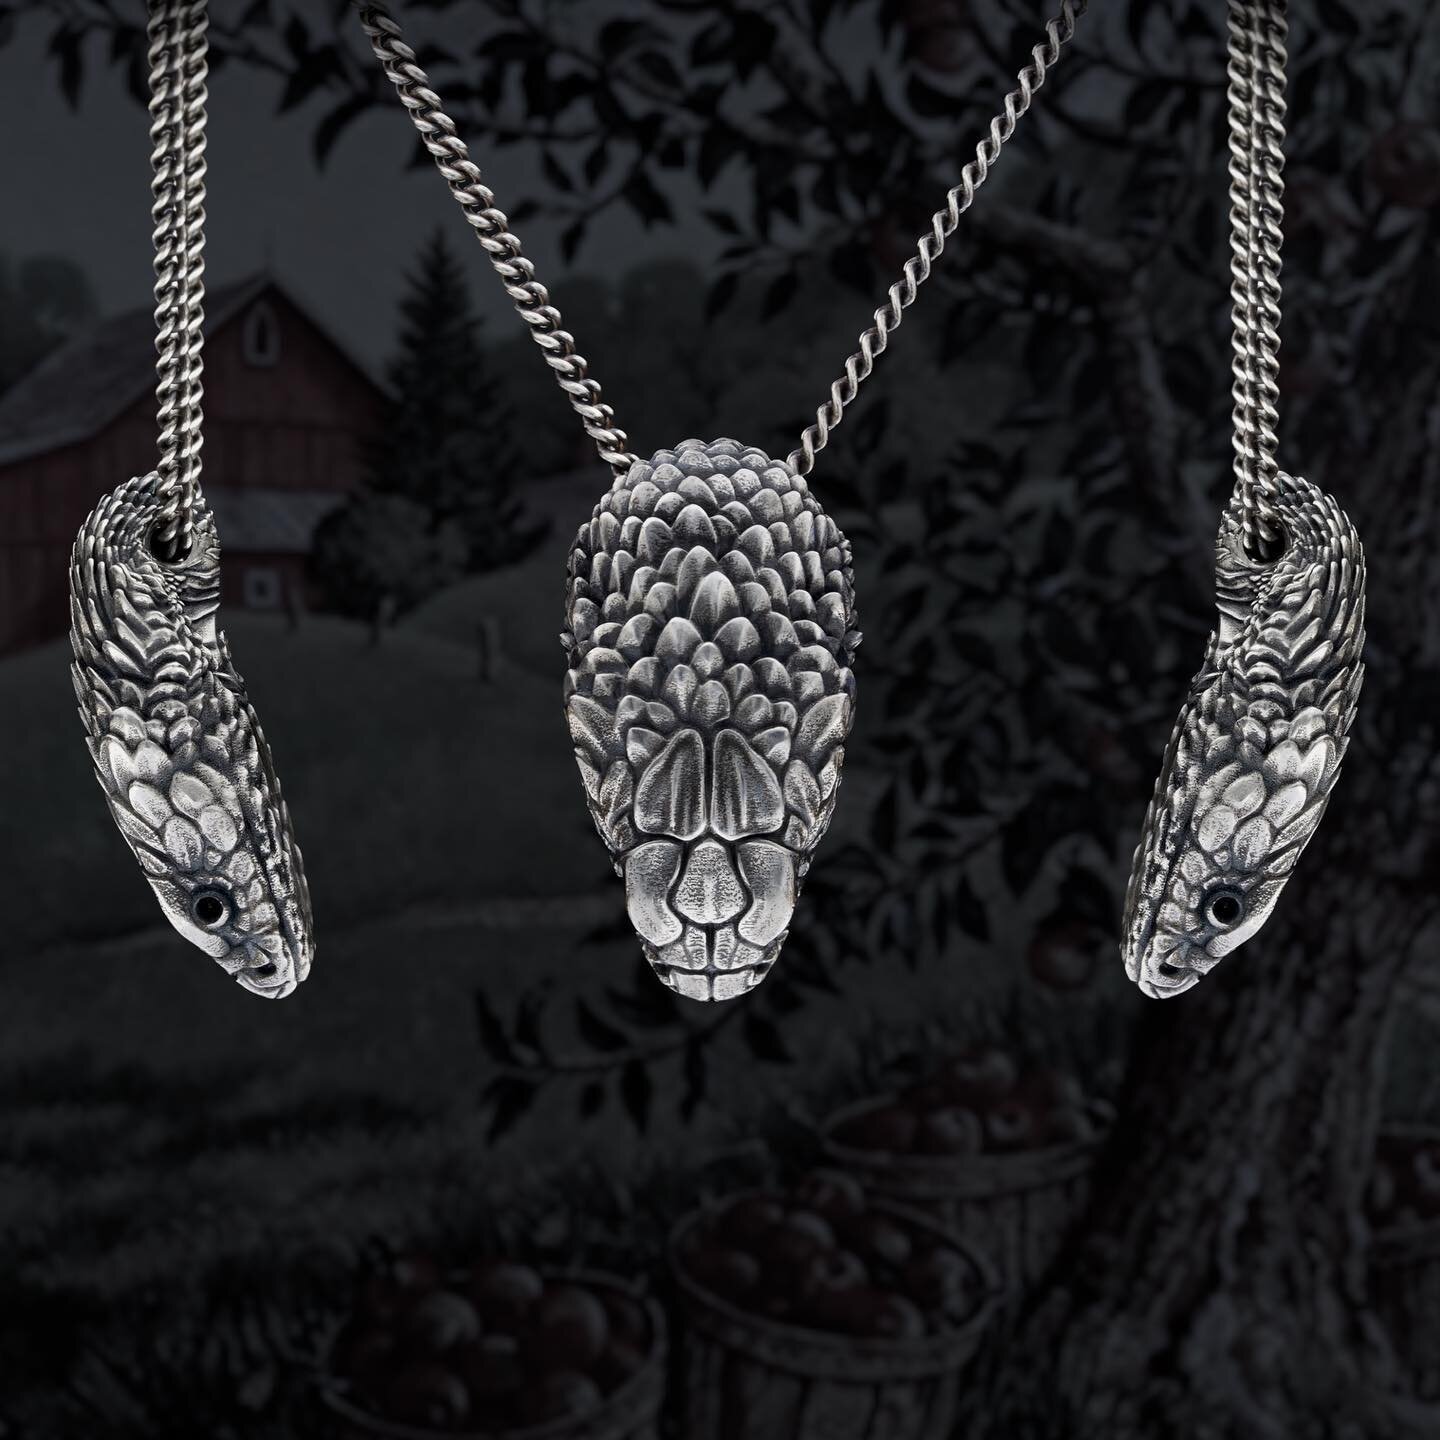 The Snake, a powerful life force of creation and destruction. As snakes shed their skin, they are symbols of rebirth, transformation, immortality, and healing. Living so close to the earth, get your Snake necklace as an emblem of the full cycle of na